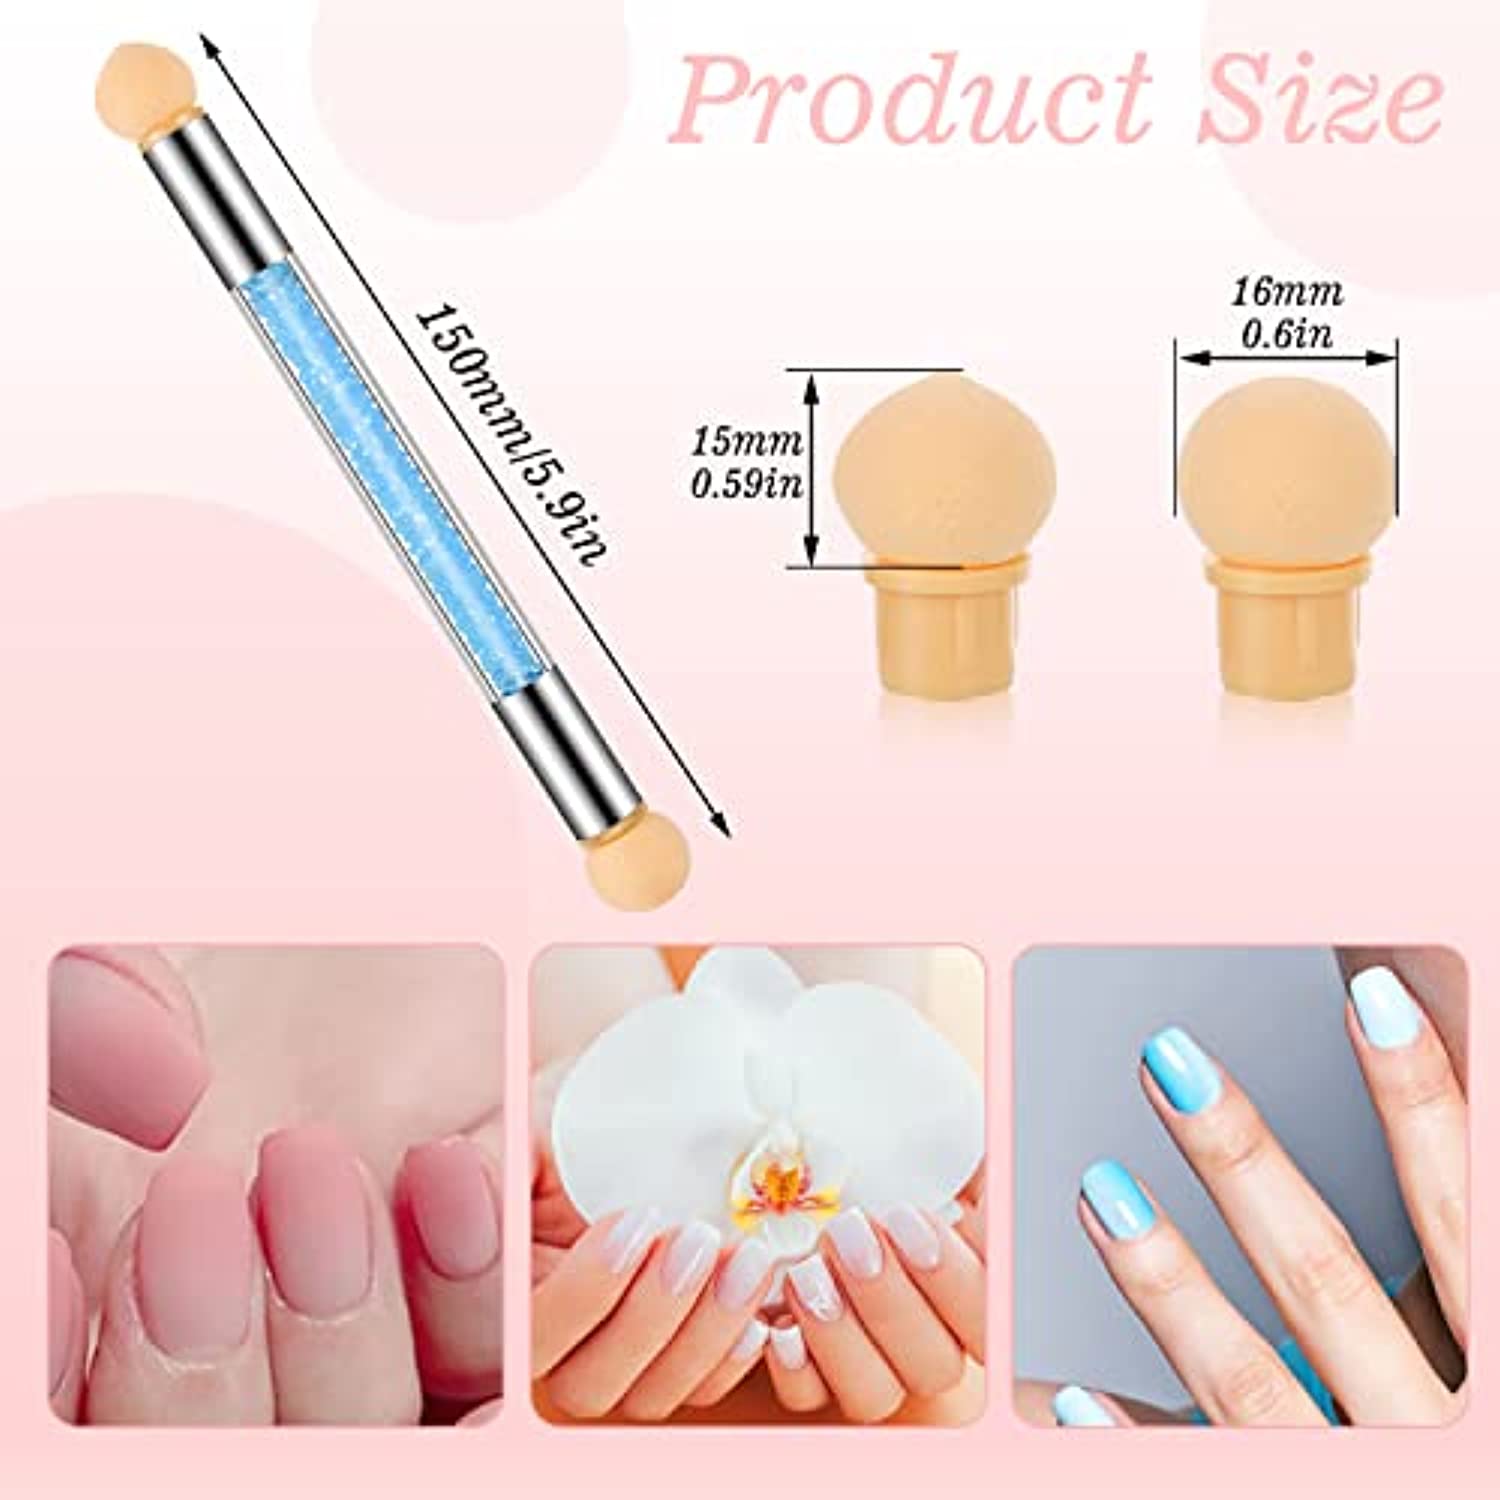 10 Pcs in 2 Set Nail Sponges for Ombre, 2 Pcs Double-Head Ombre Brush for Gel Nails with 8 Pcs Replacement Head (Pink, Blue)